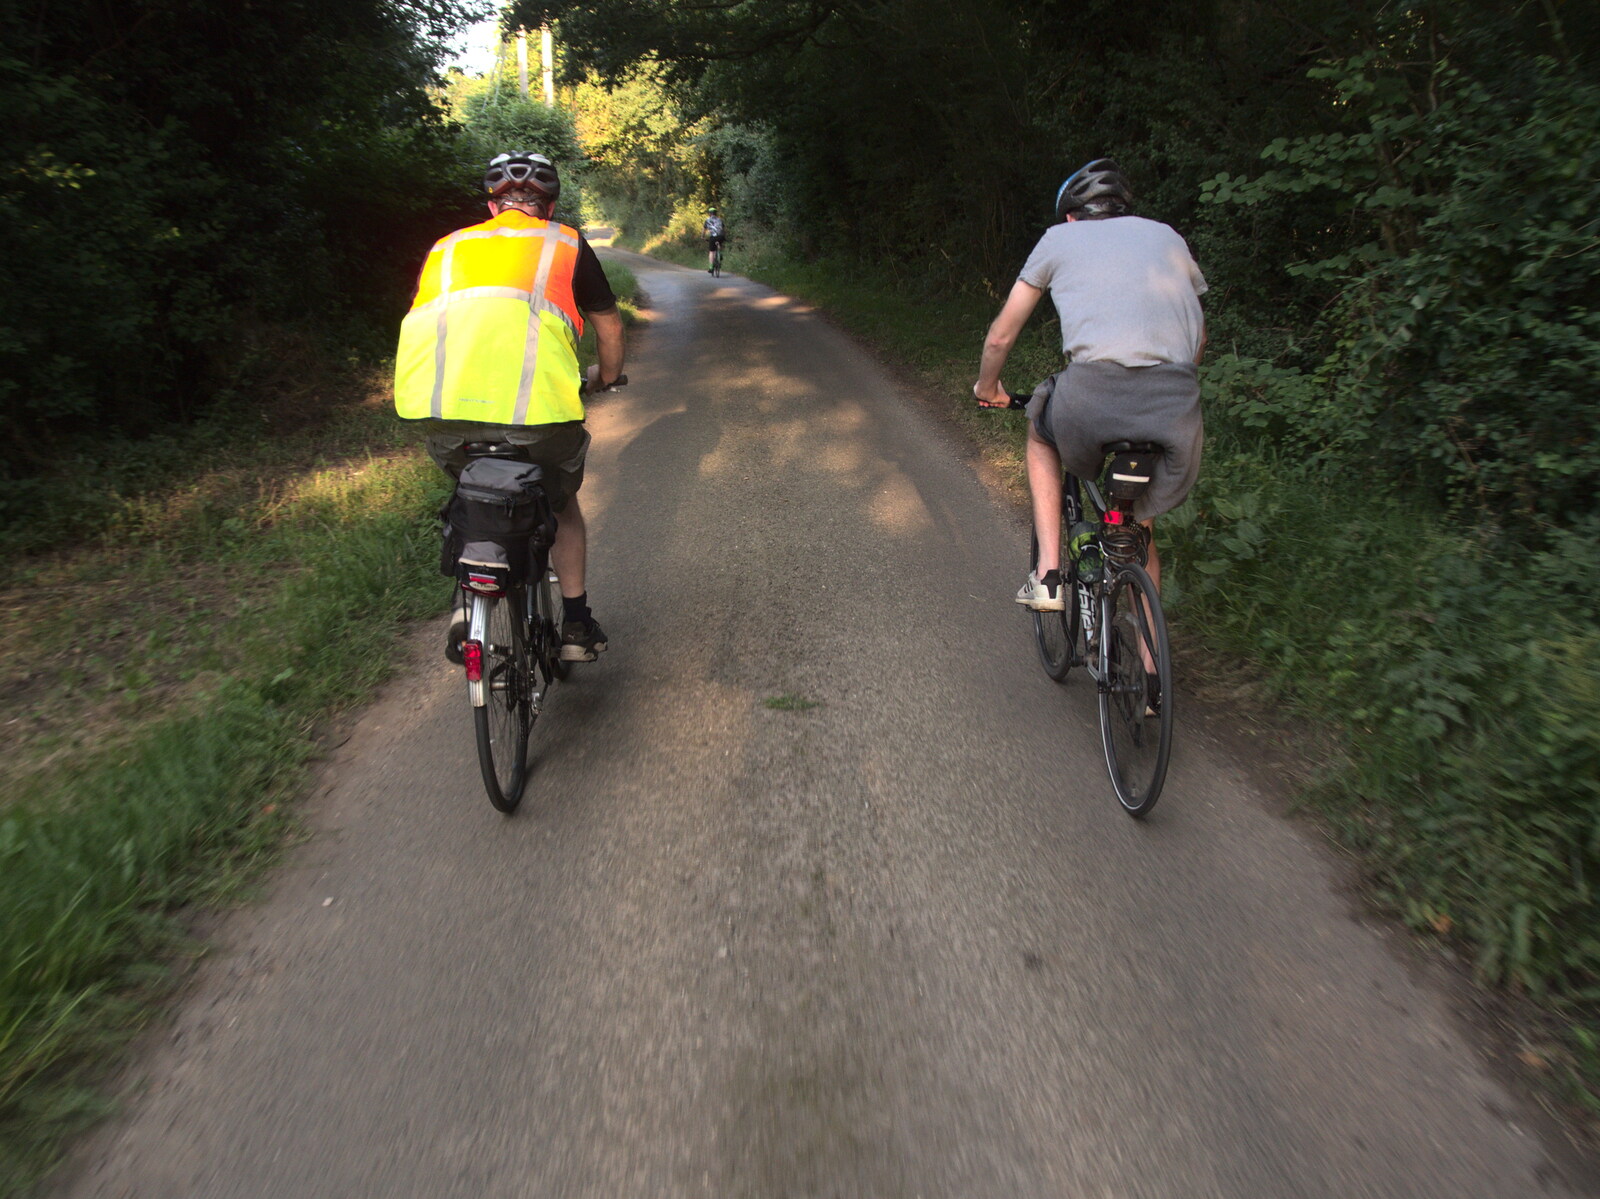 Cycling near Gissing from The BSCC at The Crown, Gissing, Norfolk - 22nd July 2021